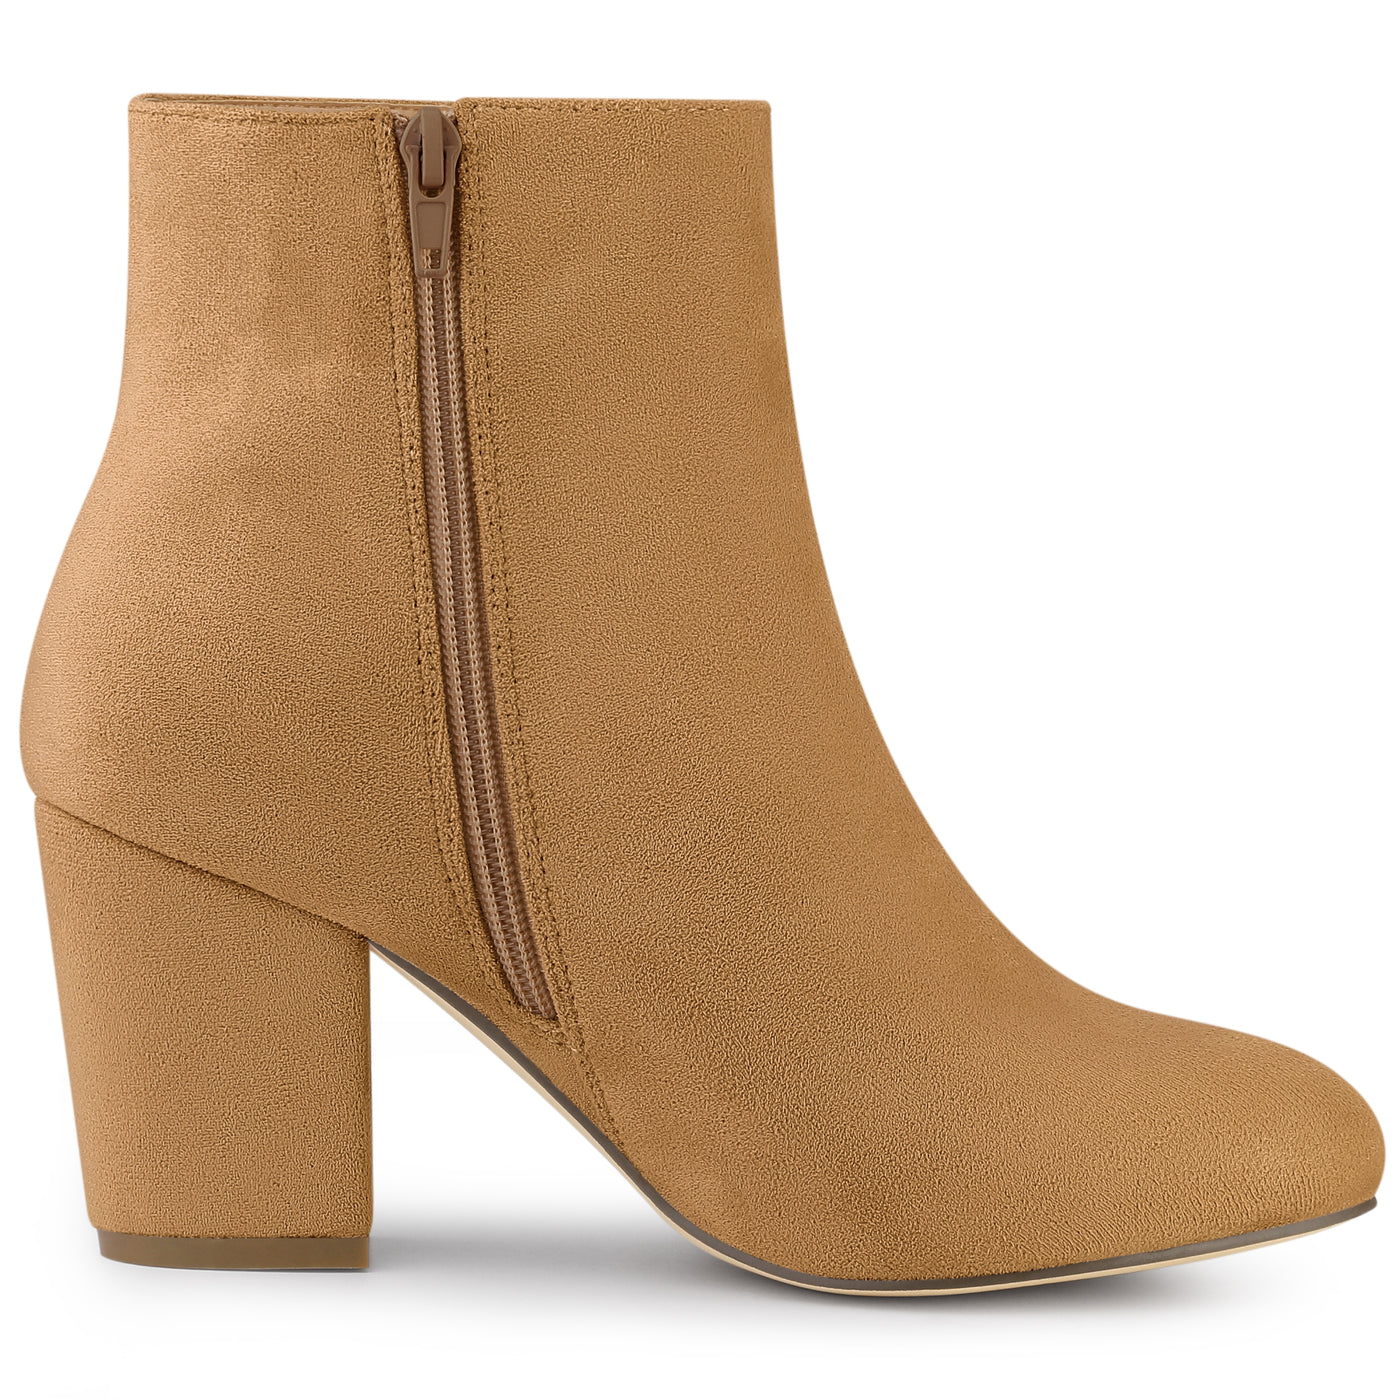 Allegra K Round Toe Side Zip Chunky Heel Ankle Boots